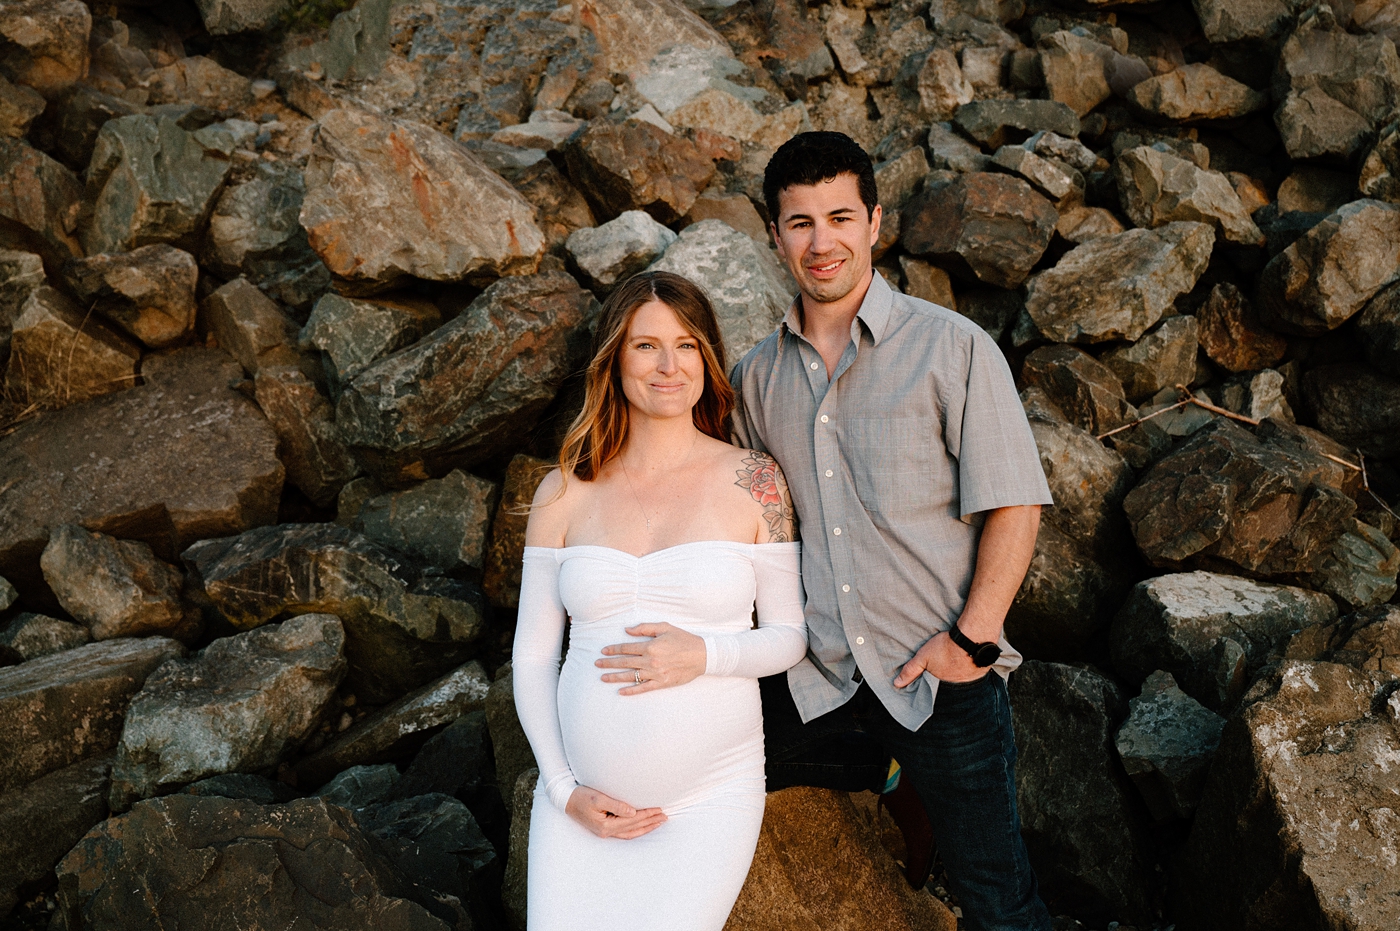 Mom & Dad stand in front of rock birm during maternity session. Image by PNW maternity photographer Meg Newton.